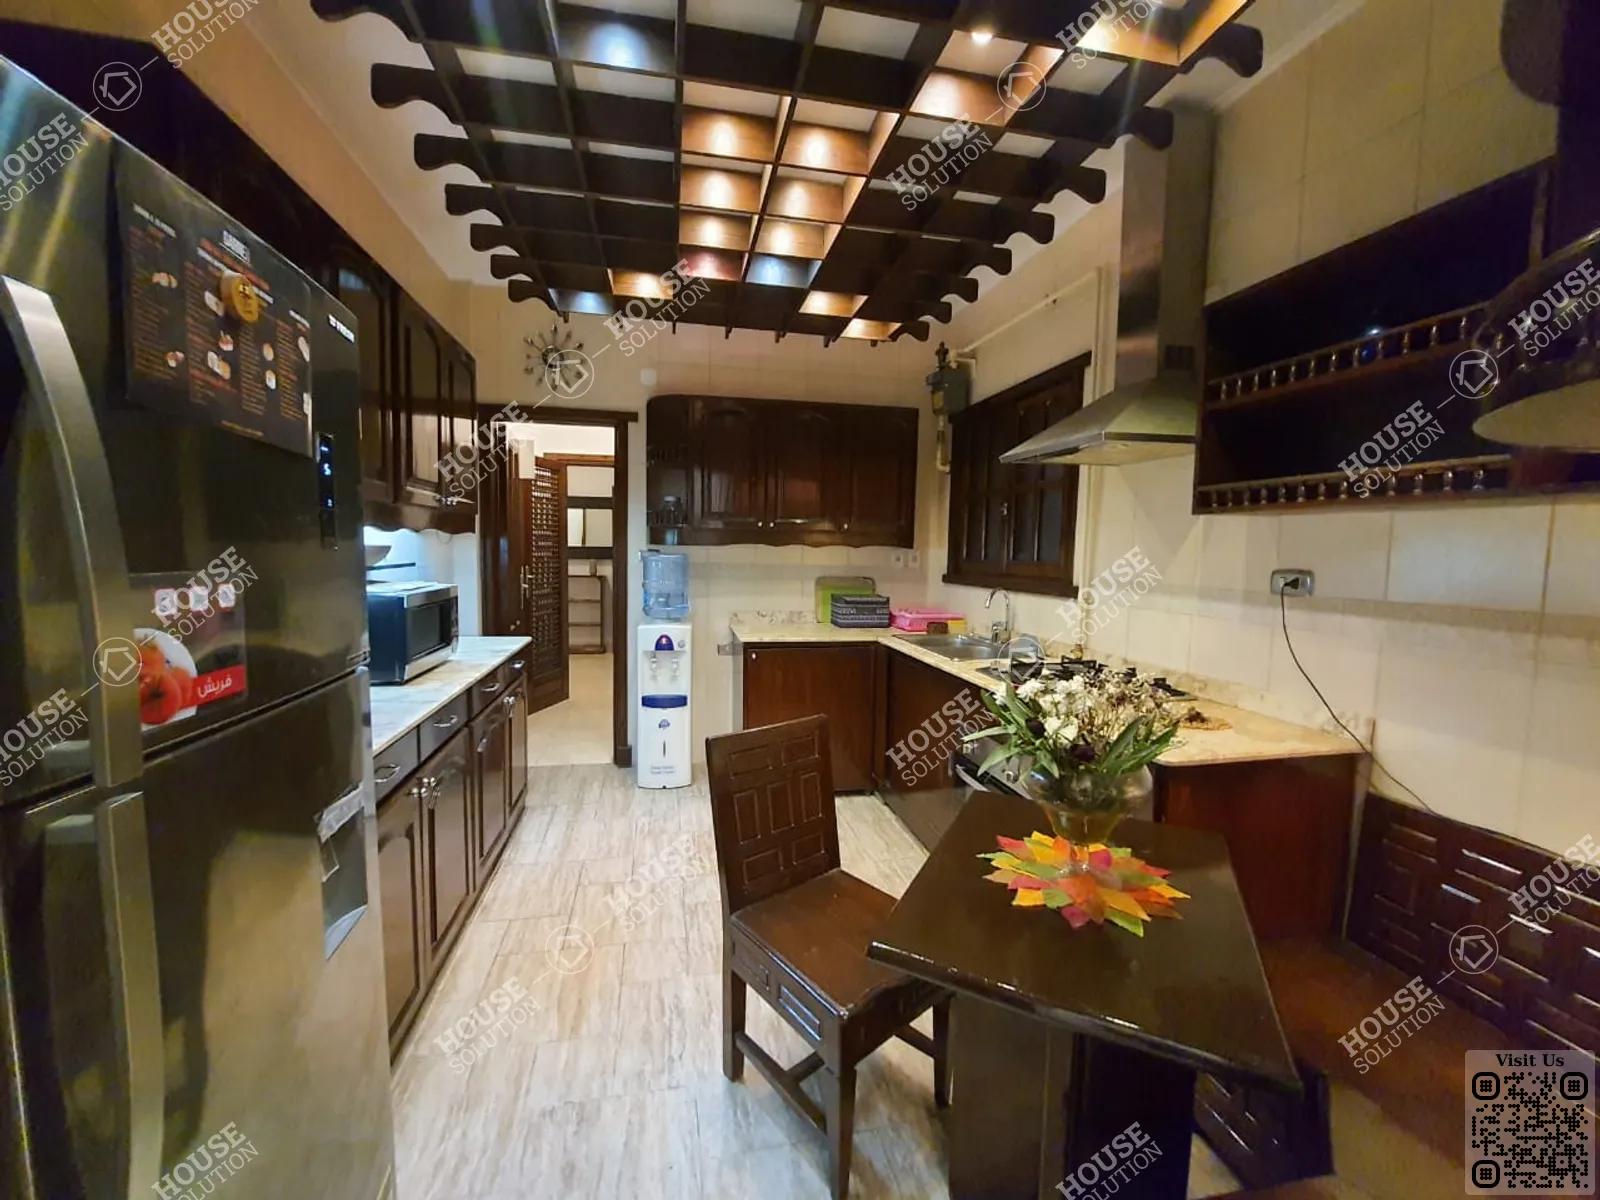 KITCHEN  @ Apartments For Rent In Maadi Maadi Sarayat Area: 180 m² consists of 3 Bedrooms 2 Bathrooms Modern furnished 5 stars #3874-2